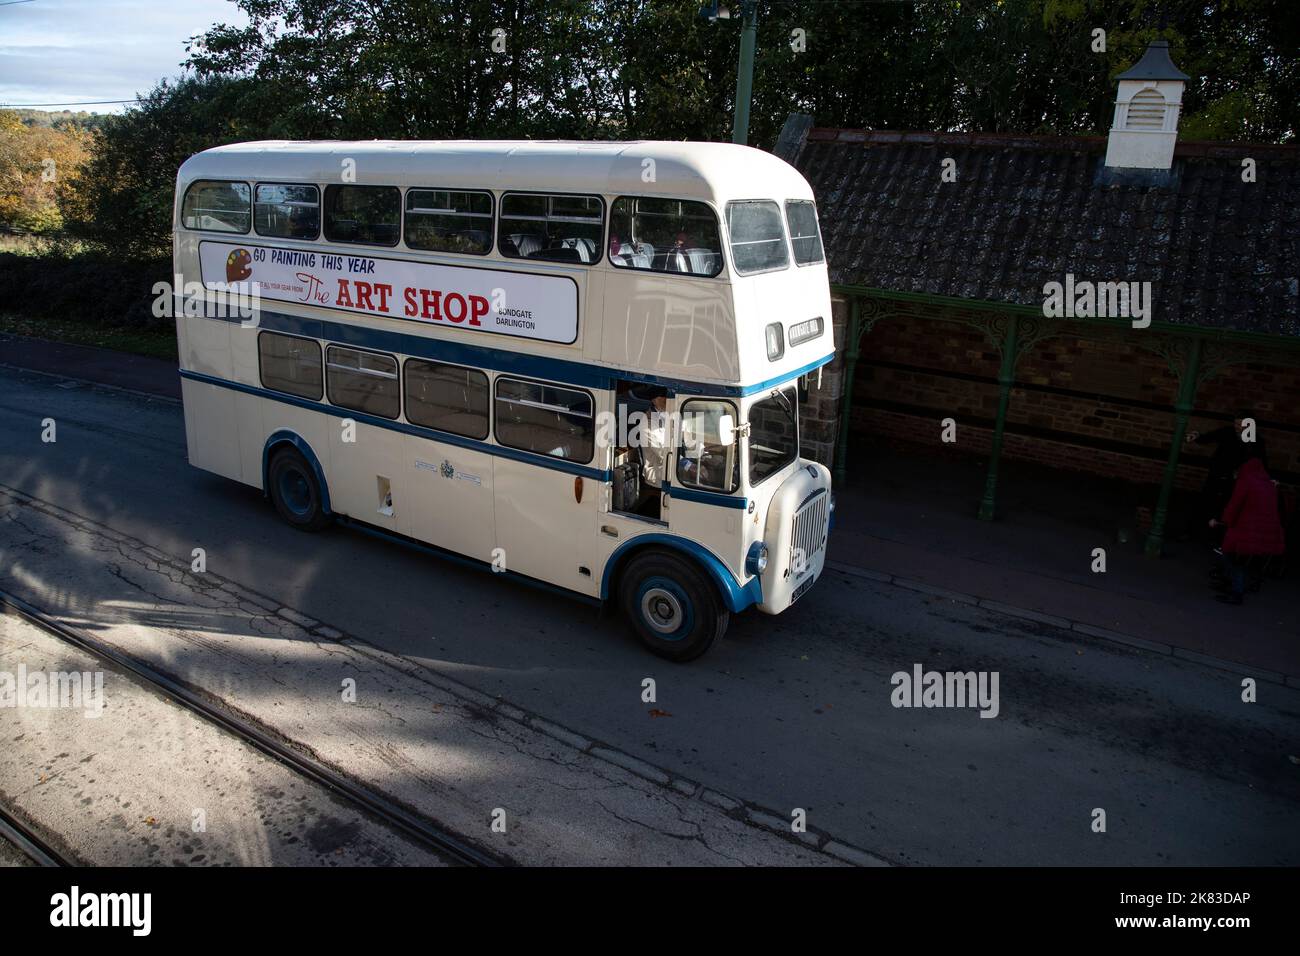 Darlington Corporation Daimler CVG5 double decker bus, also known as Darlington 304 in service at the Beamish Living Museum in Co. Durham, U.K. Stock Photo